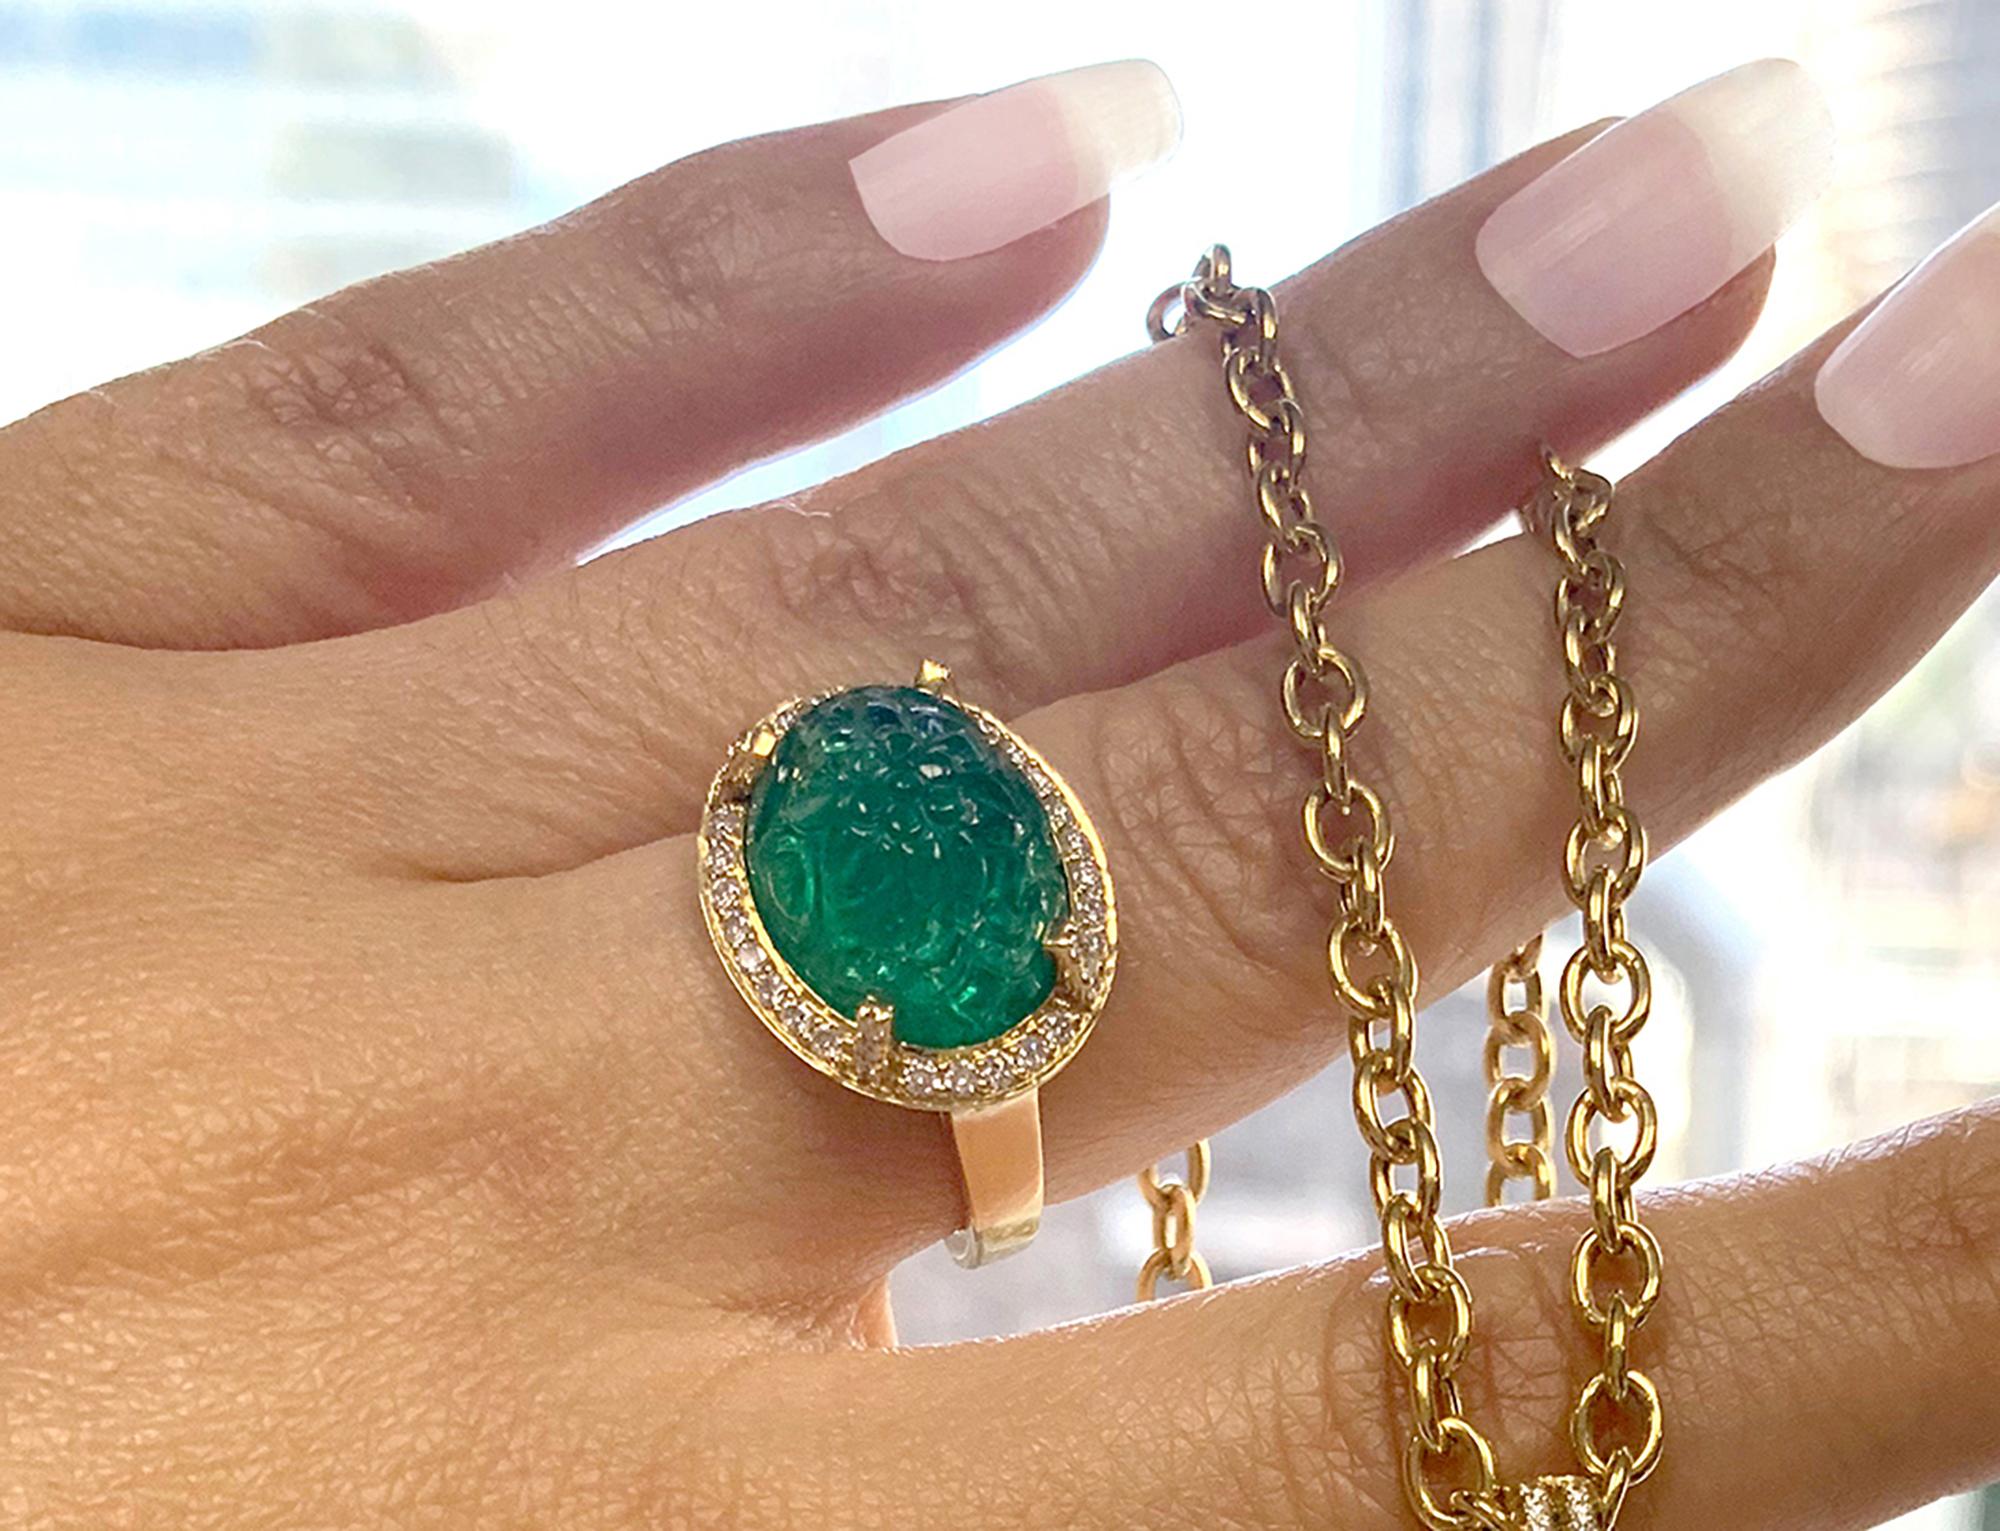 Carved Emerald Ring with Diamonds in 18K Yellow Gold, from 'G-One' Collection 

Stone Size: 15 x 11 mm 

Approx. Wt: 10.74 Carats (Emerald)

Diamonds: G-H / VS, Approx. Wt: 0.32 Carats
